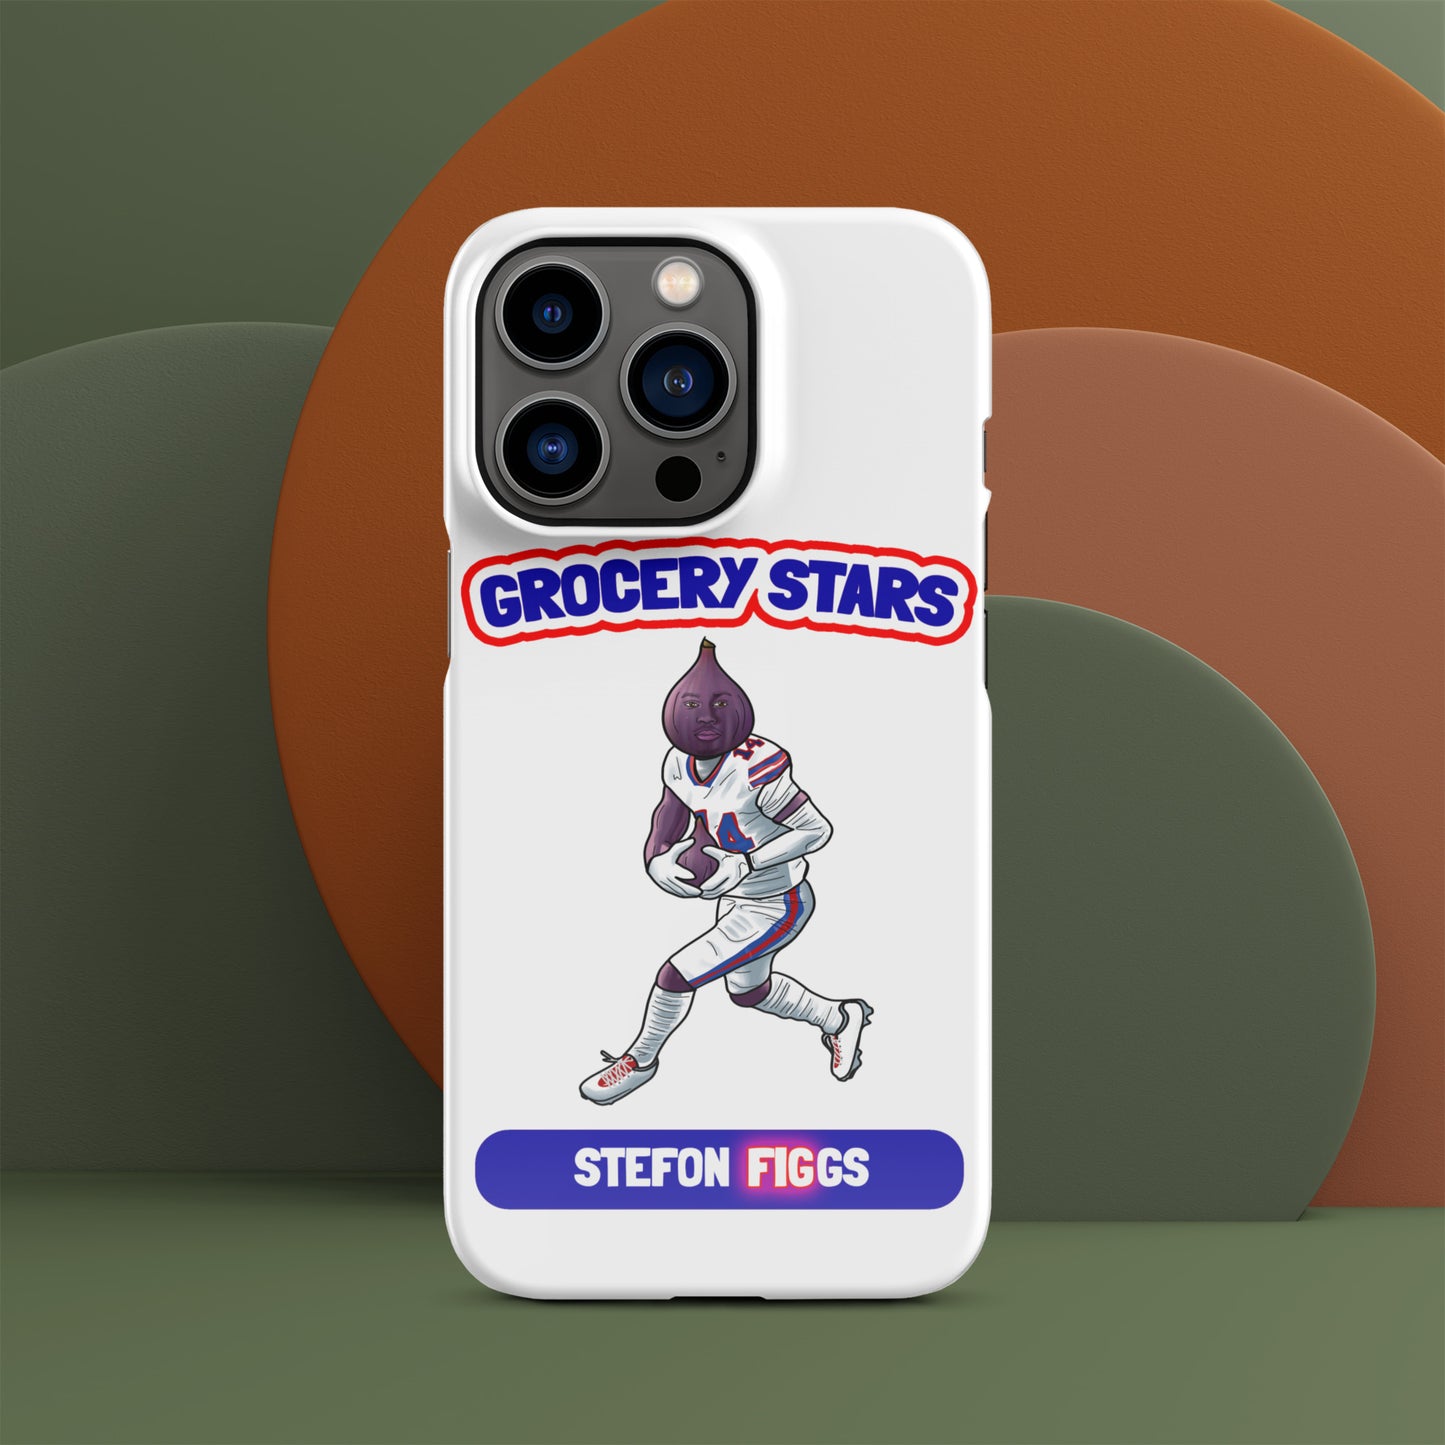 Stefon Figgs - iPhone Case®